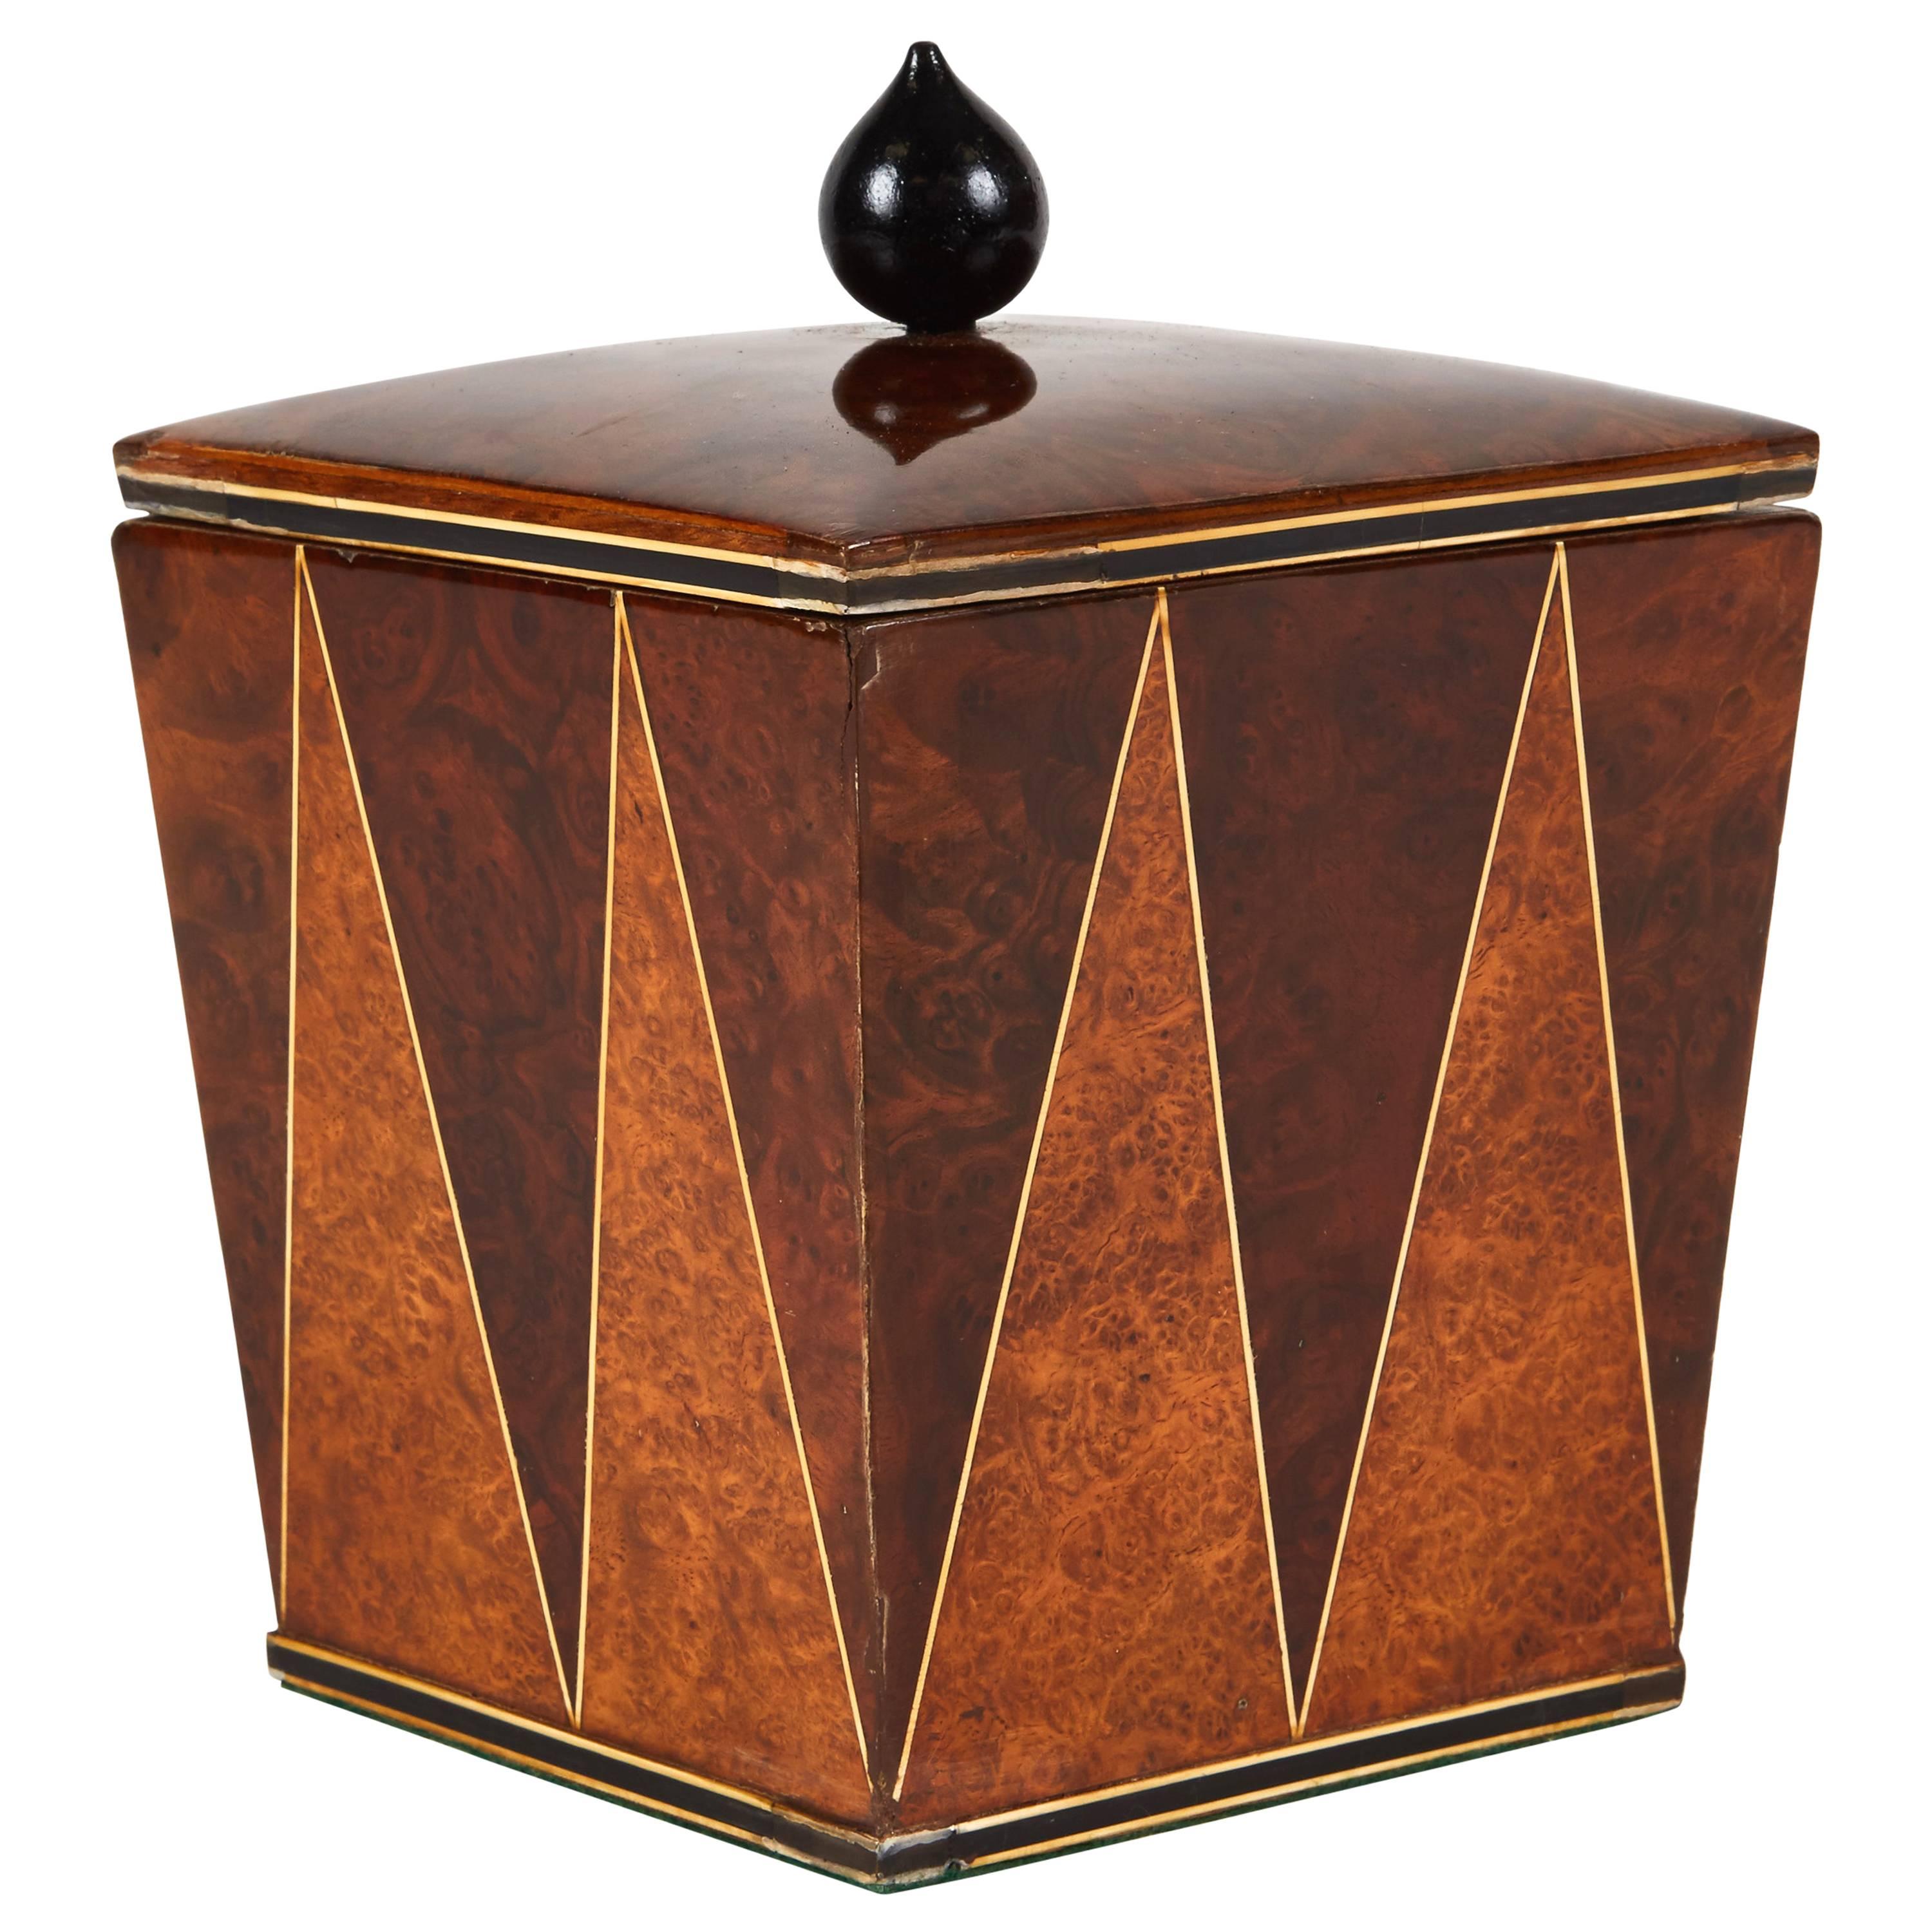 Mulberry and Walnut Tobacco Art Deco Jar from England Circa 1940